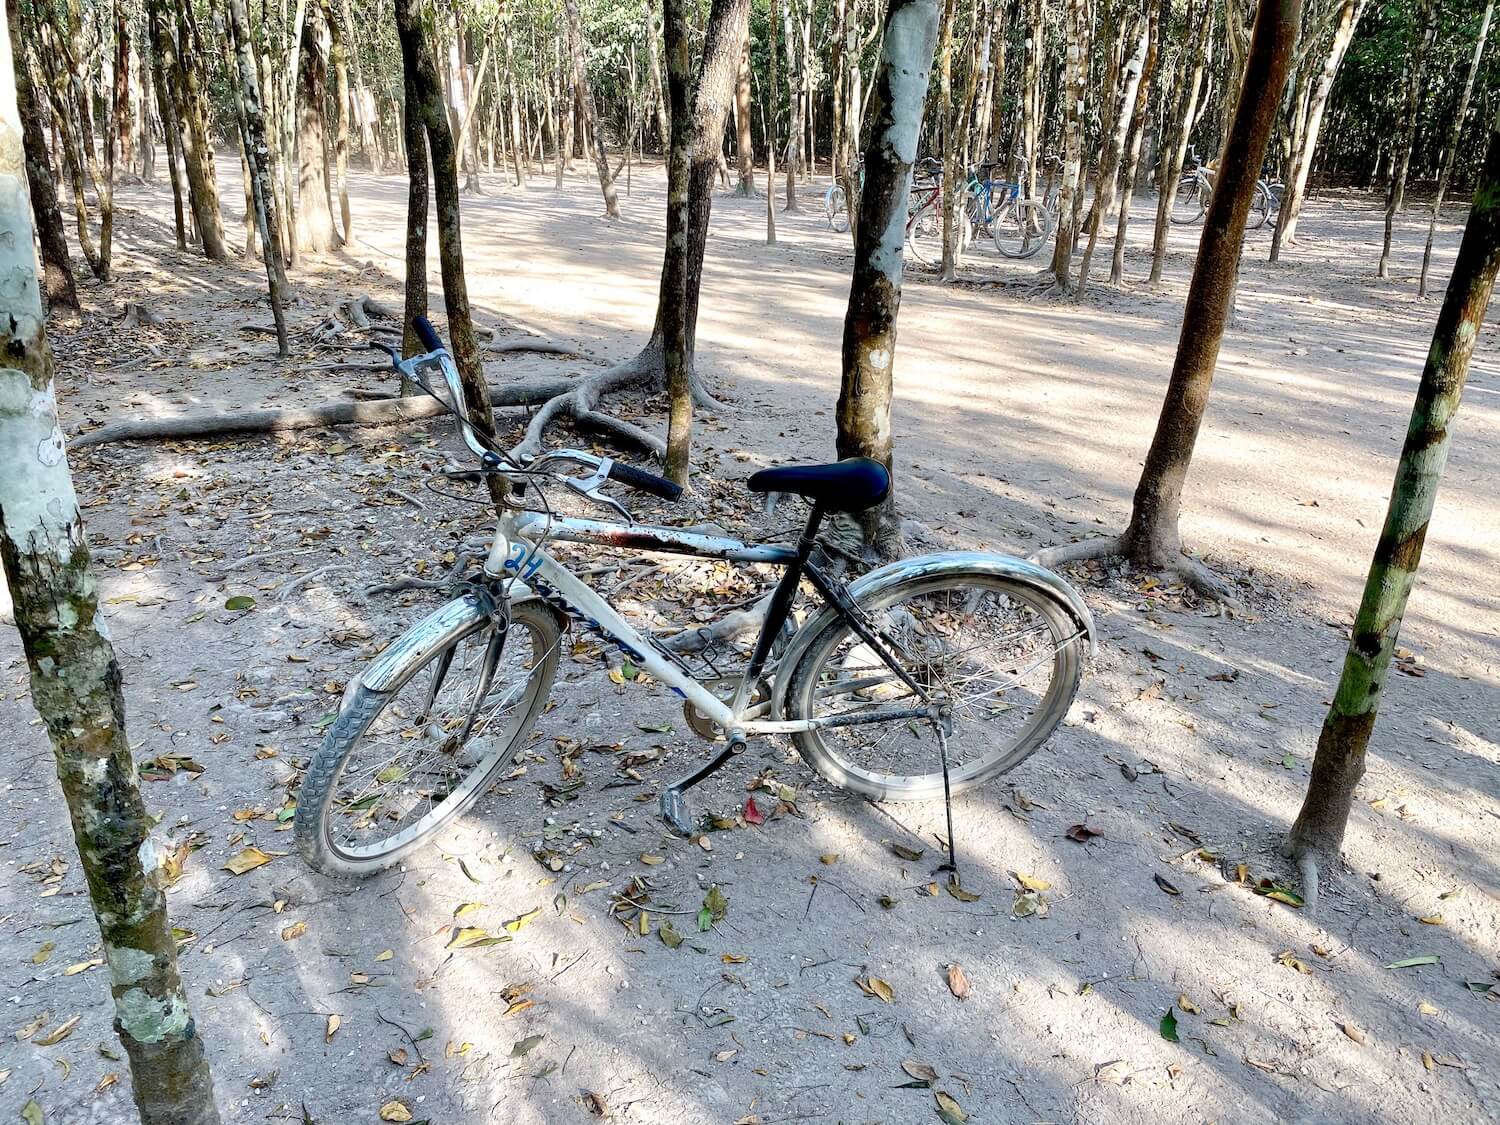 Bicycle covered in white dust is propped up by a kick stand off a roadway in amongst multi-colored bark of rubber trees.  In the background are several other bikes parked on the other side of the dusty roadway. 